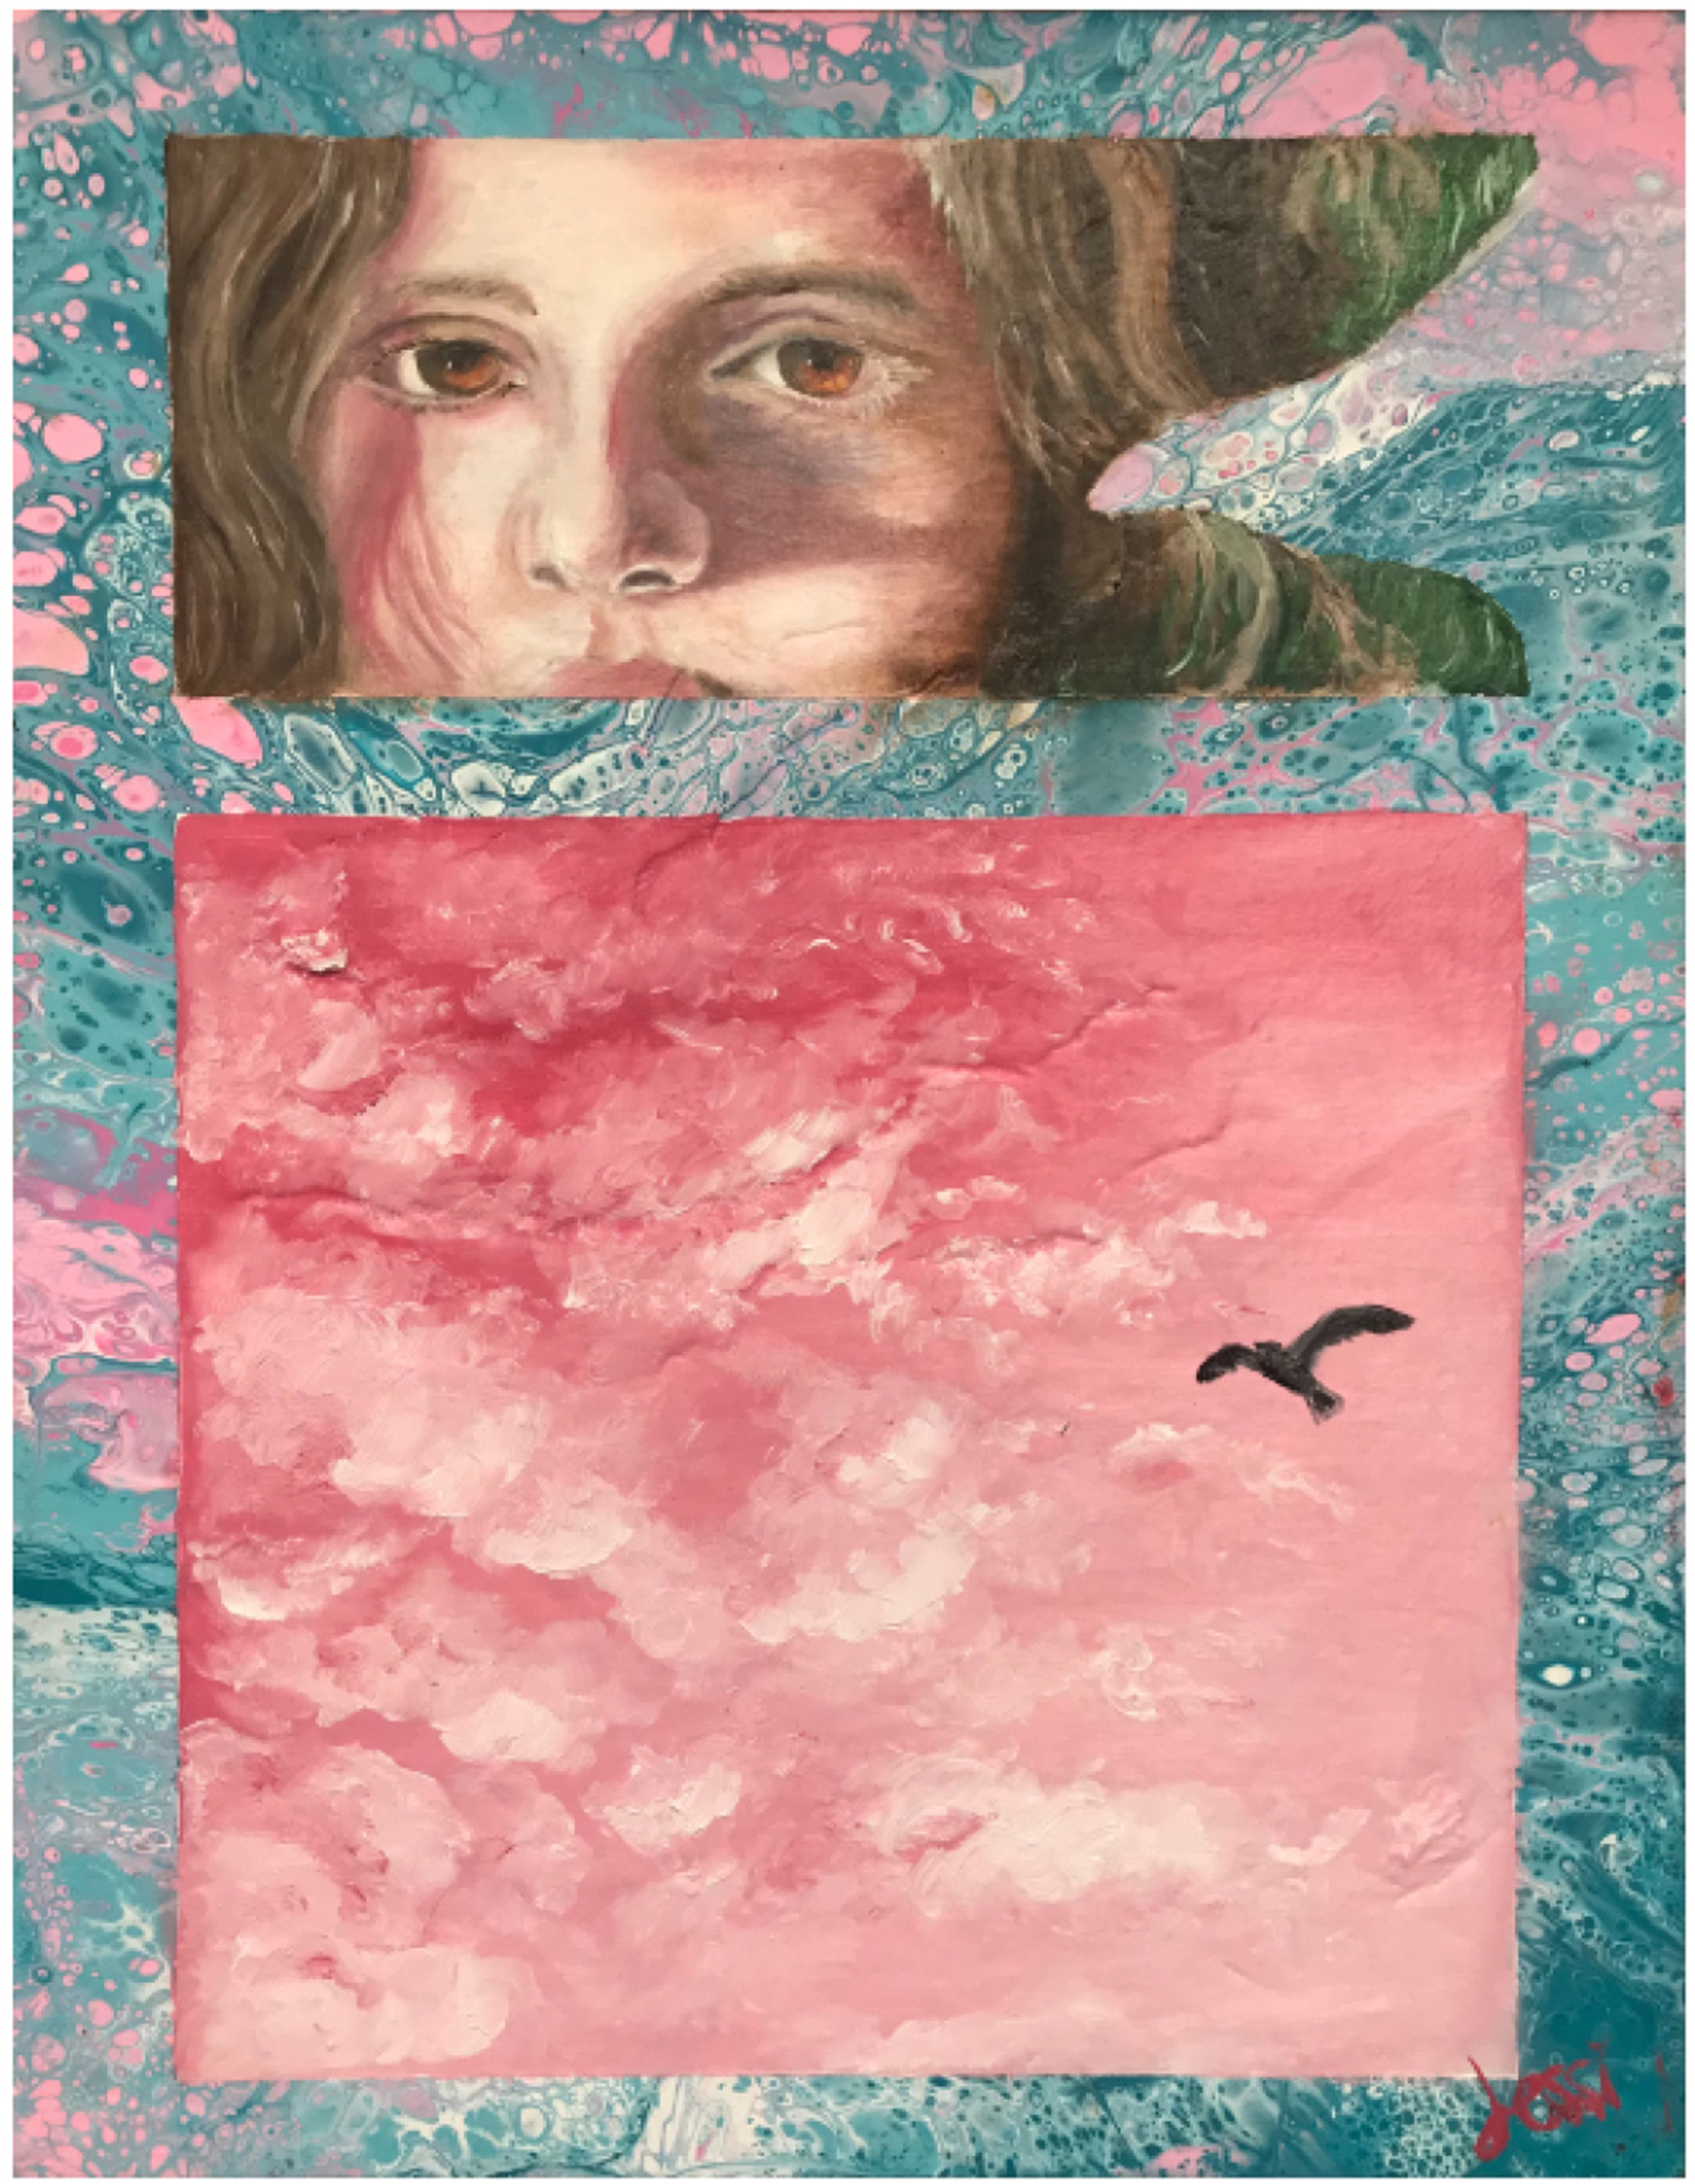 Painting of a young woman at the top with a square pink sky and a bird below, both against a turquoise background